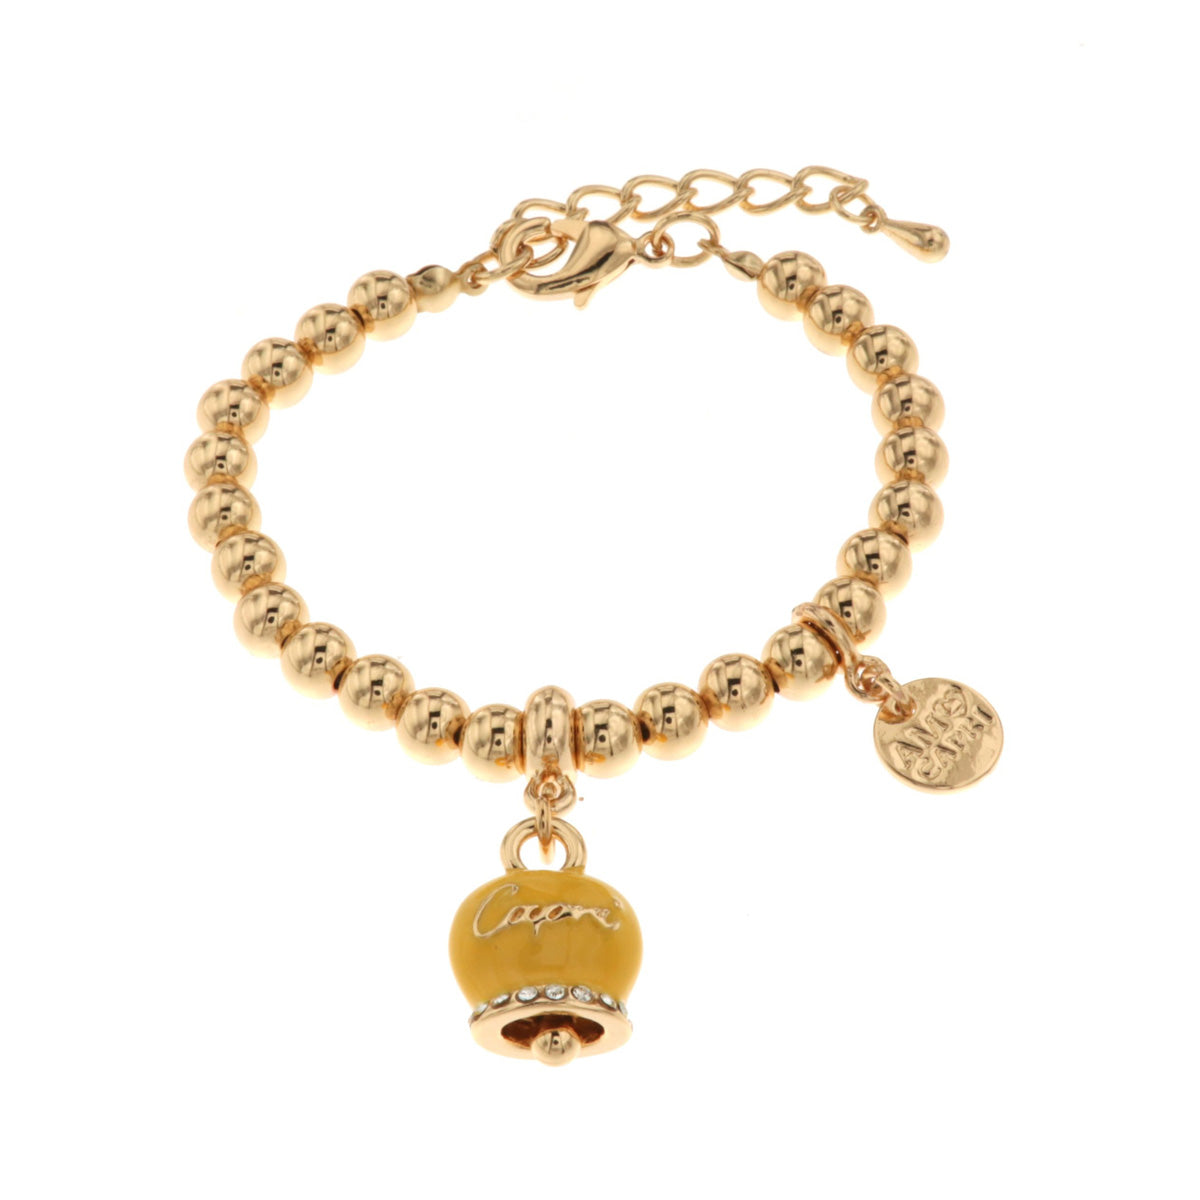 Metal bracelet with yellow bell with Capri writing and white crystals